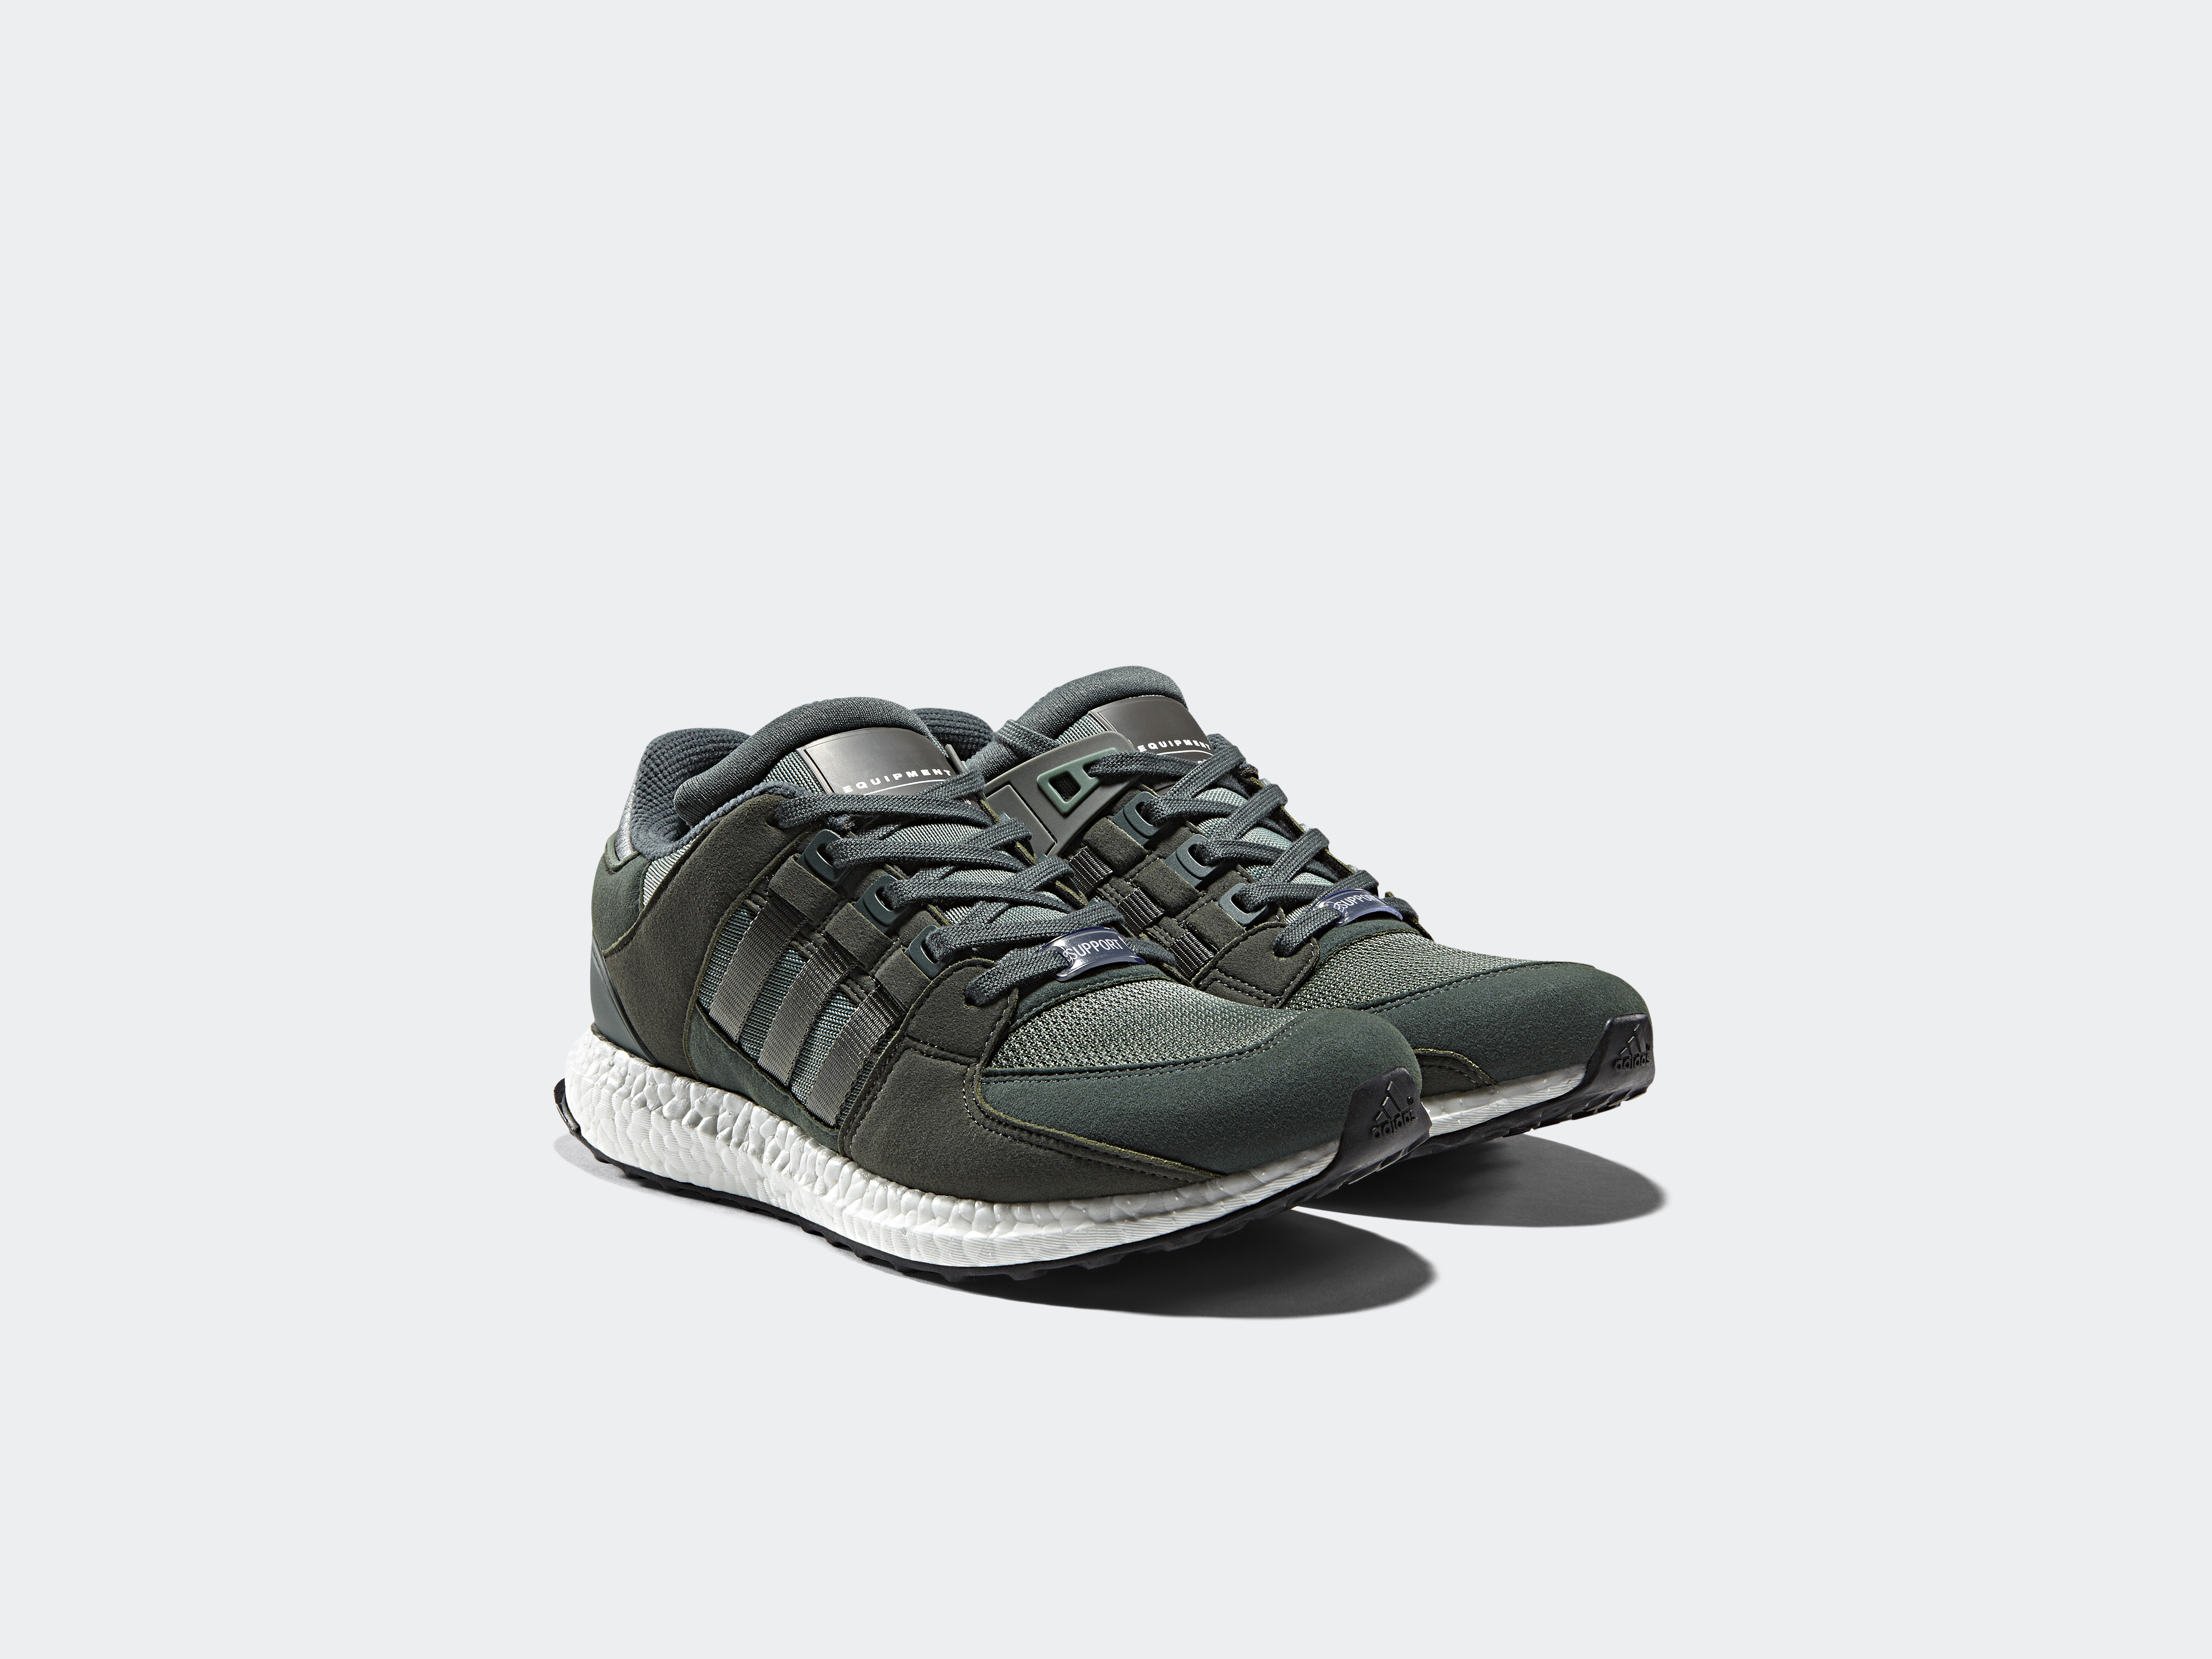 adidas EQT support ultra Muted Premium Pack 2